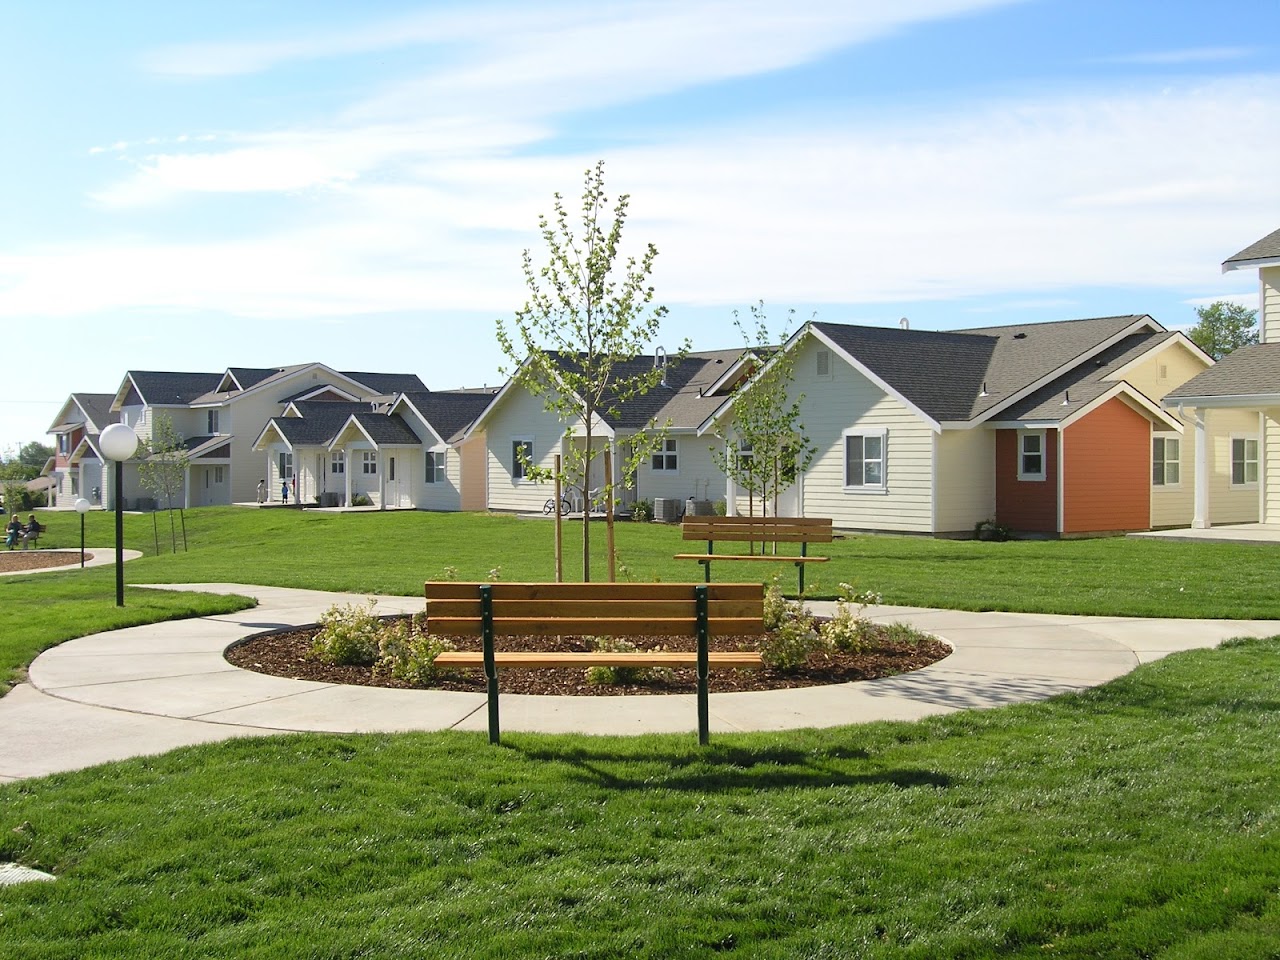 Photo of DESERT HAVEN. Affordable housing located at 935 S SEVENTH AVE OTHELLO, WA 99344